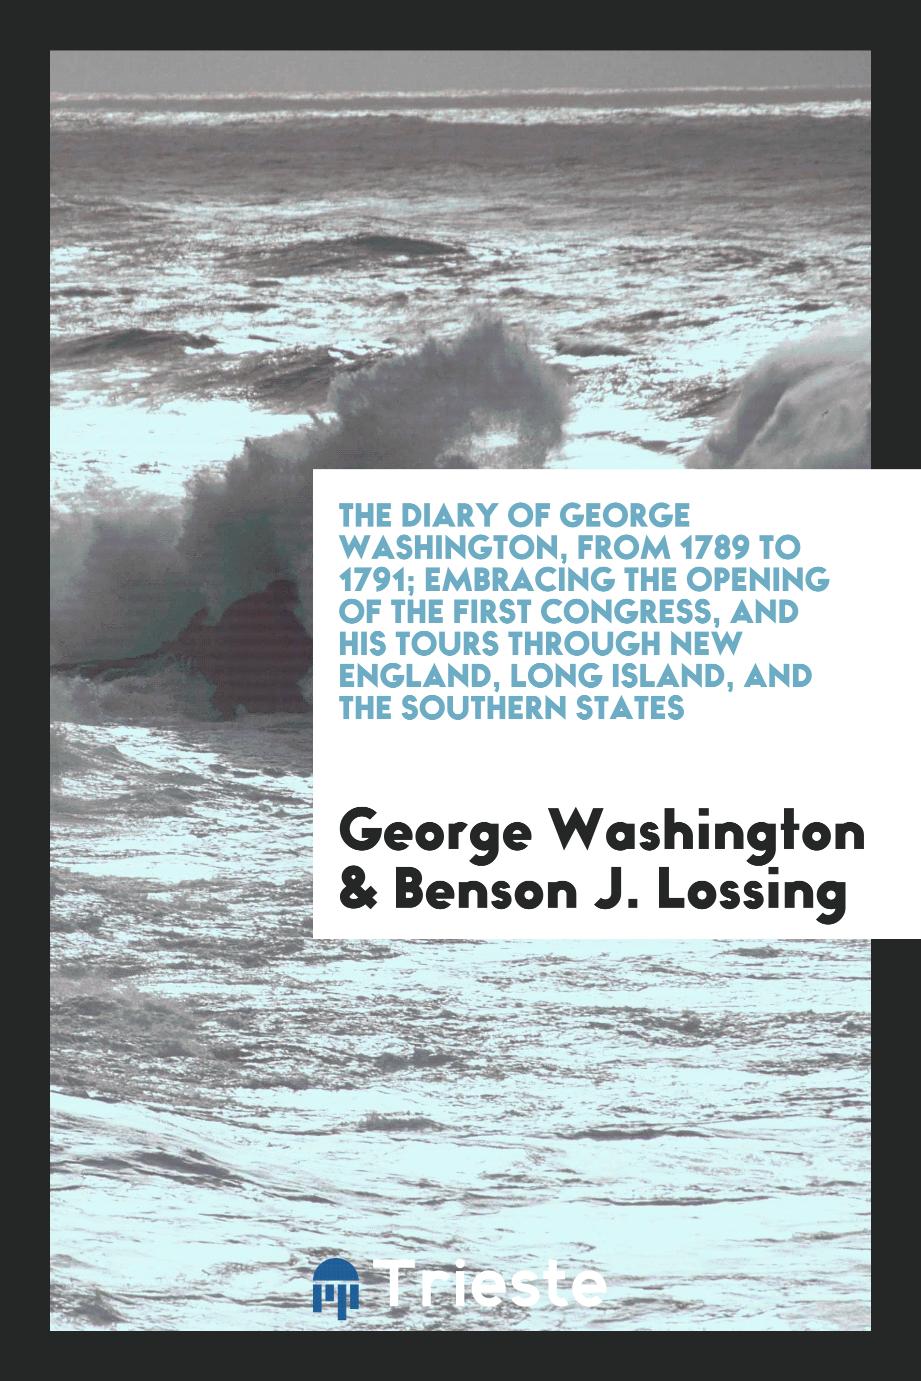 The diary of George Washington, from 1789 to 1791; embracing the opening of the first Congress, and his tours through New England, Long Island, and the southern states